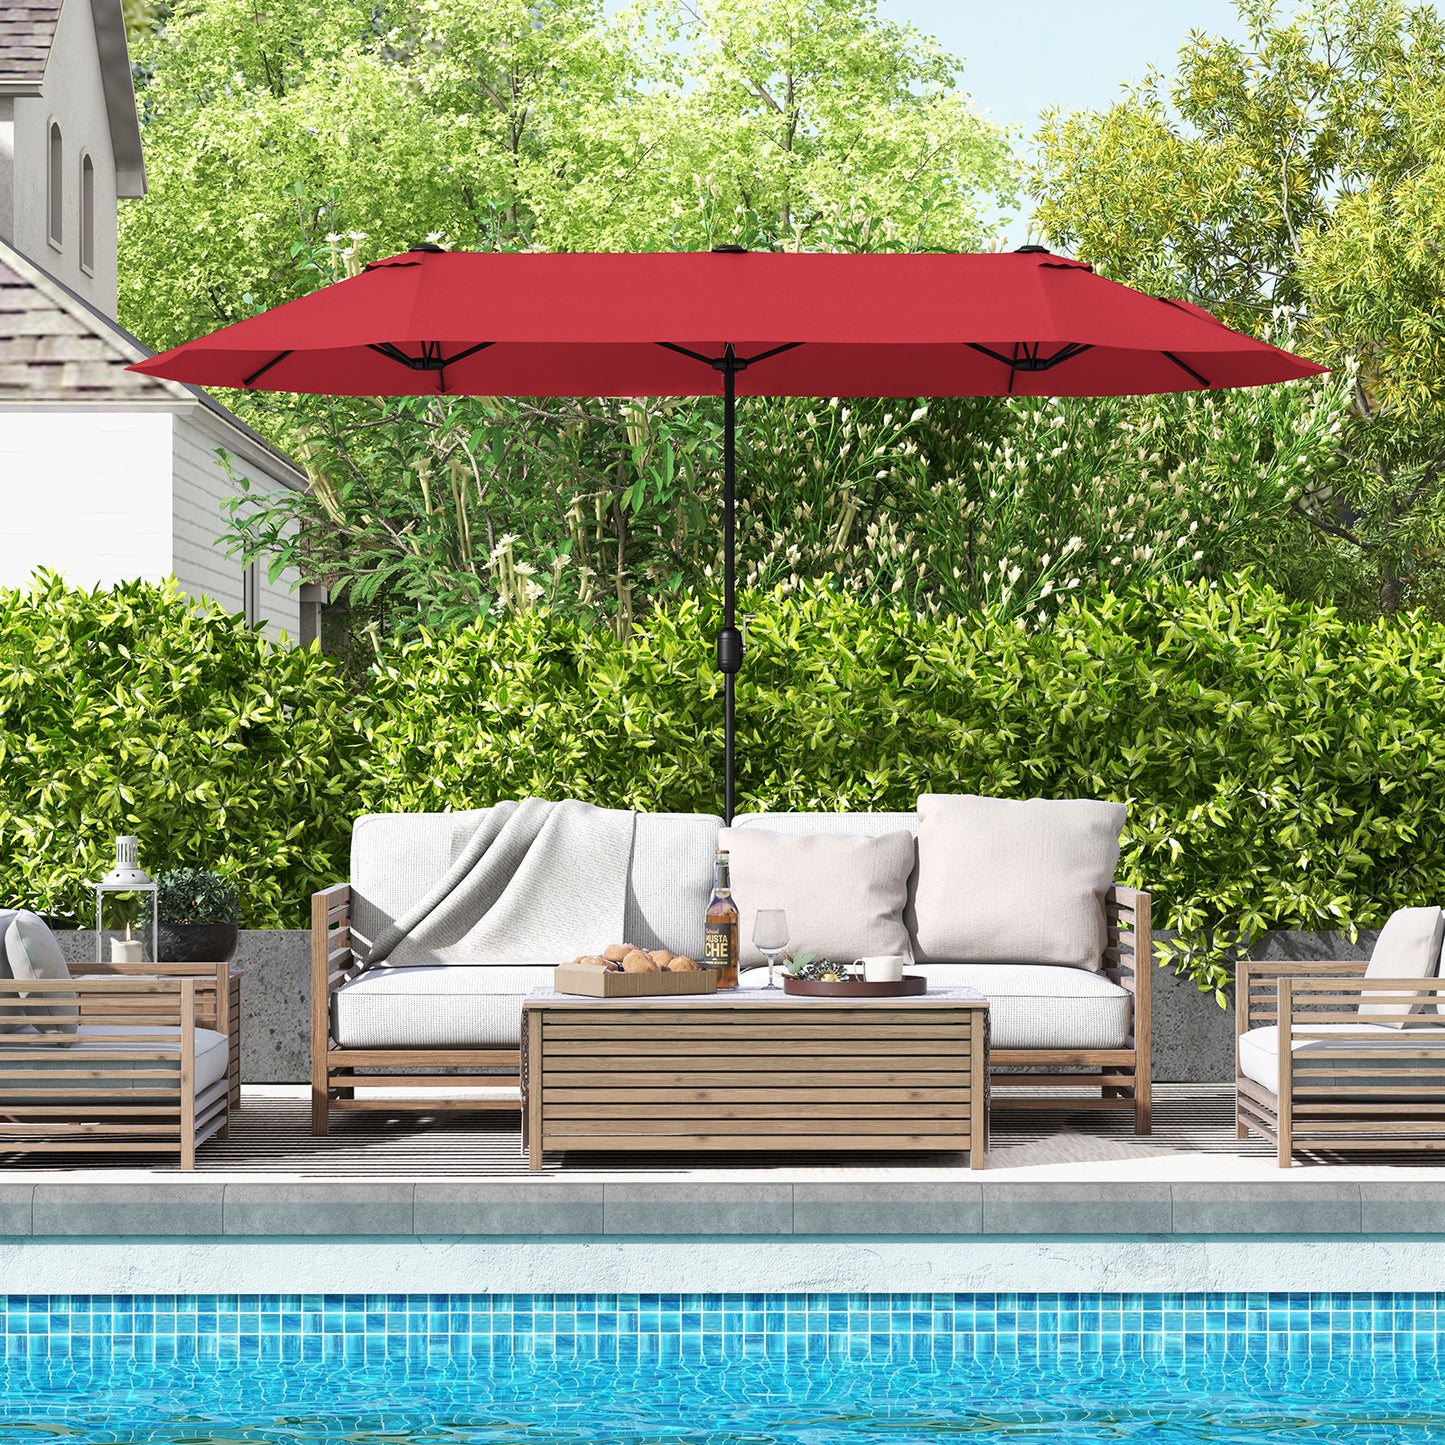 13 Feet Double-Sided Patio Twin Table Umbrella with Crank Handle-Wine